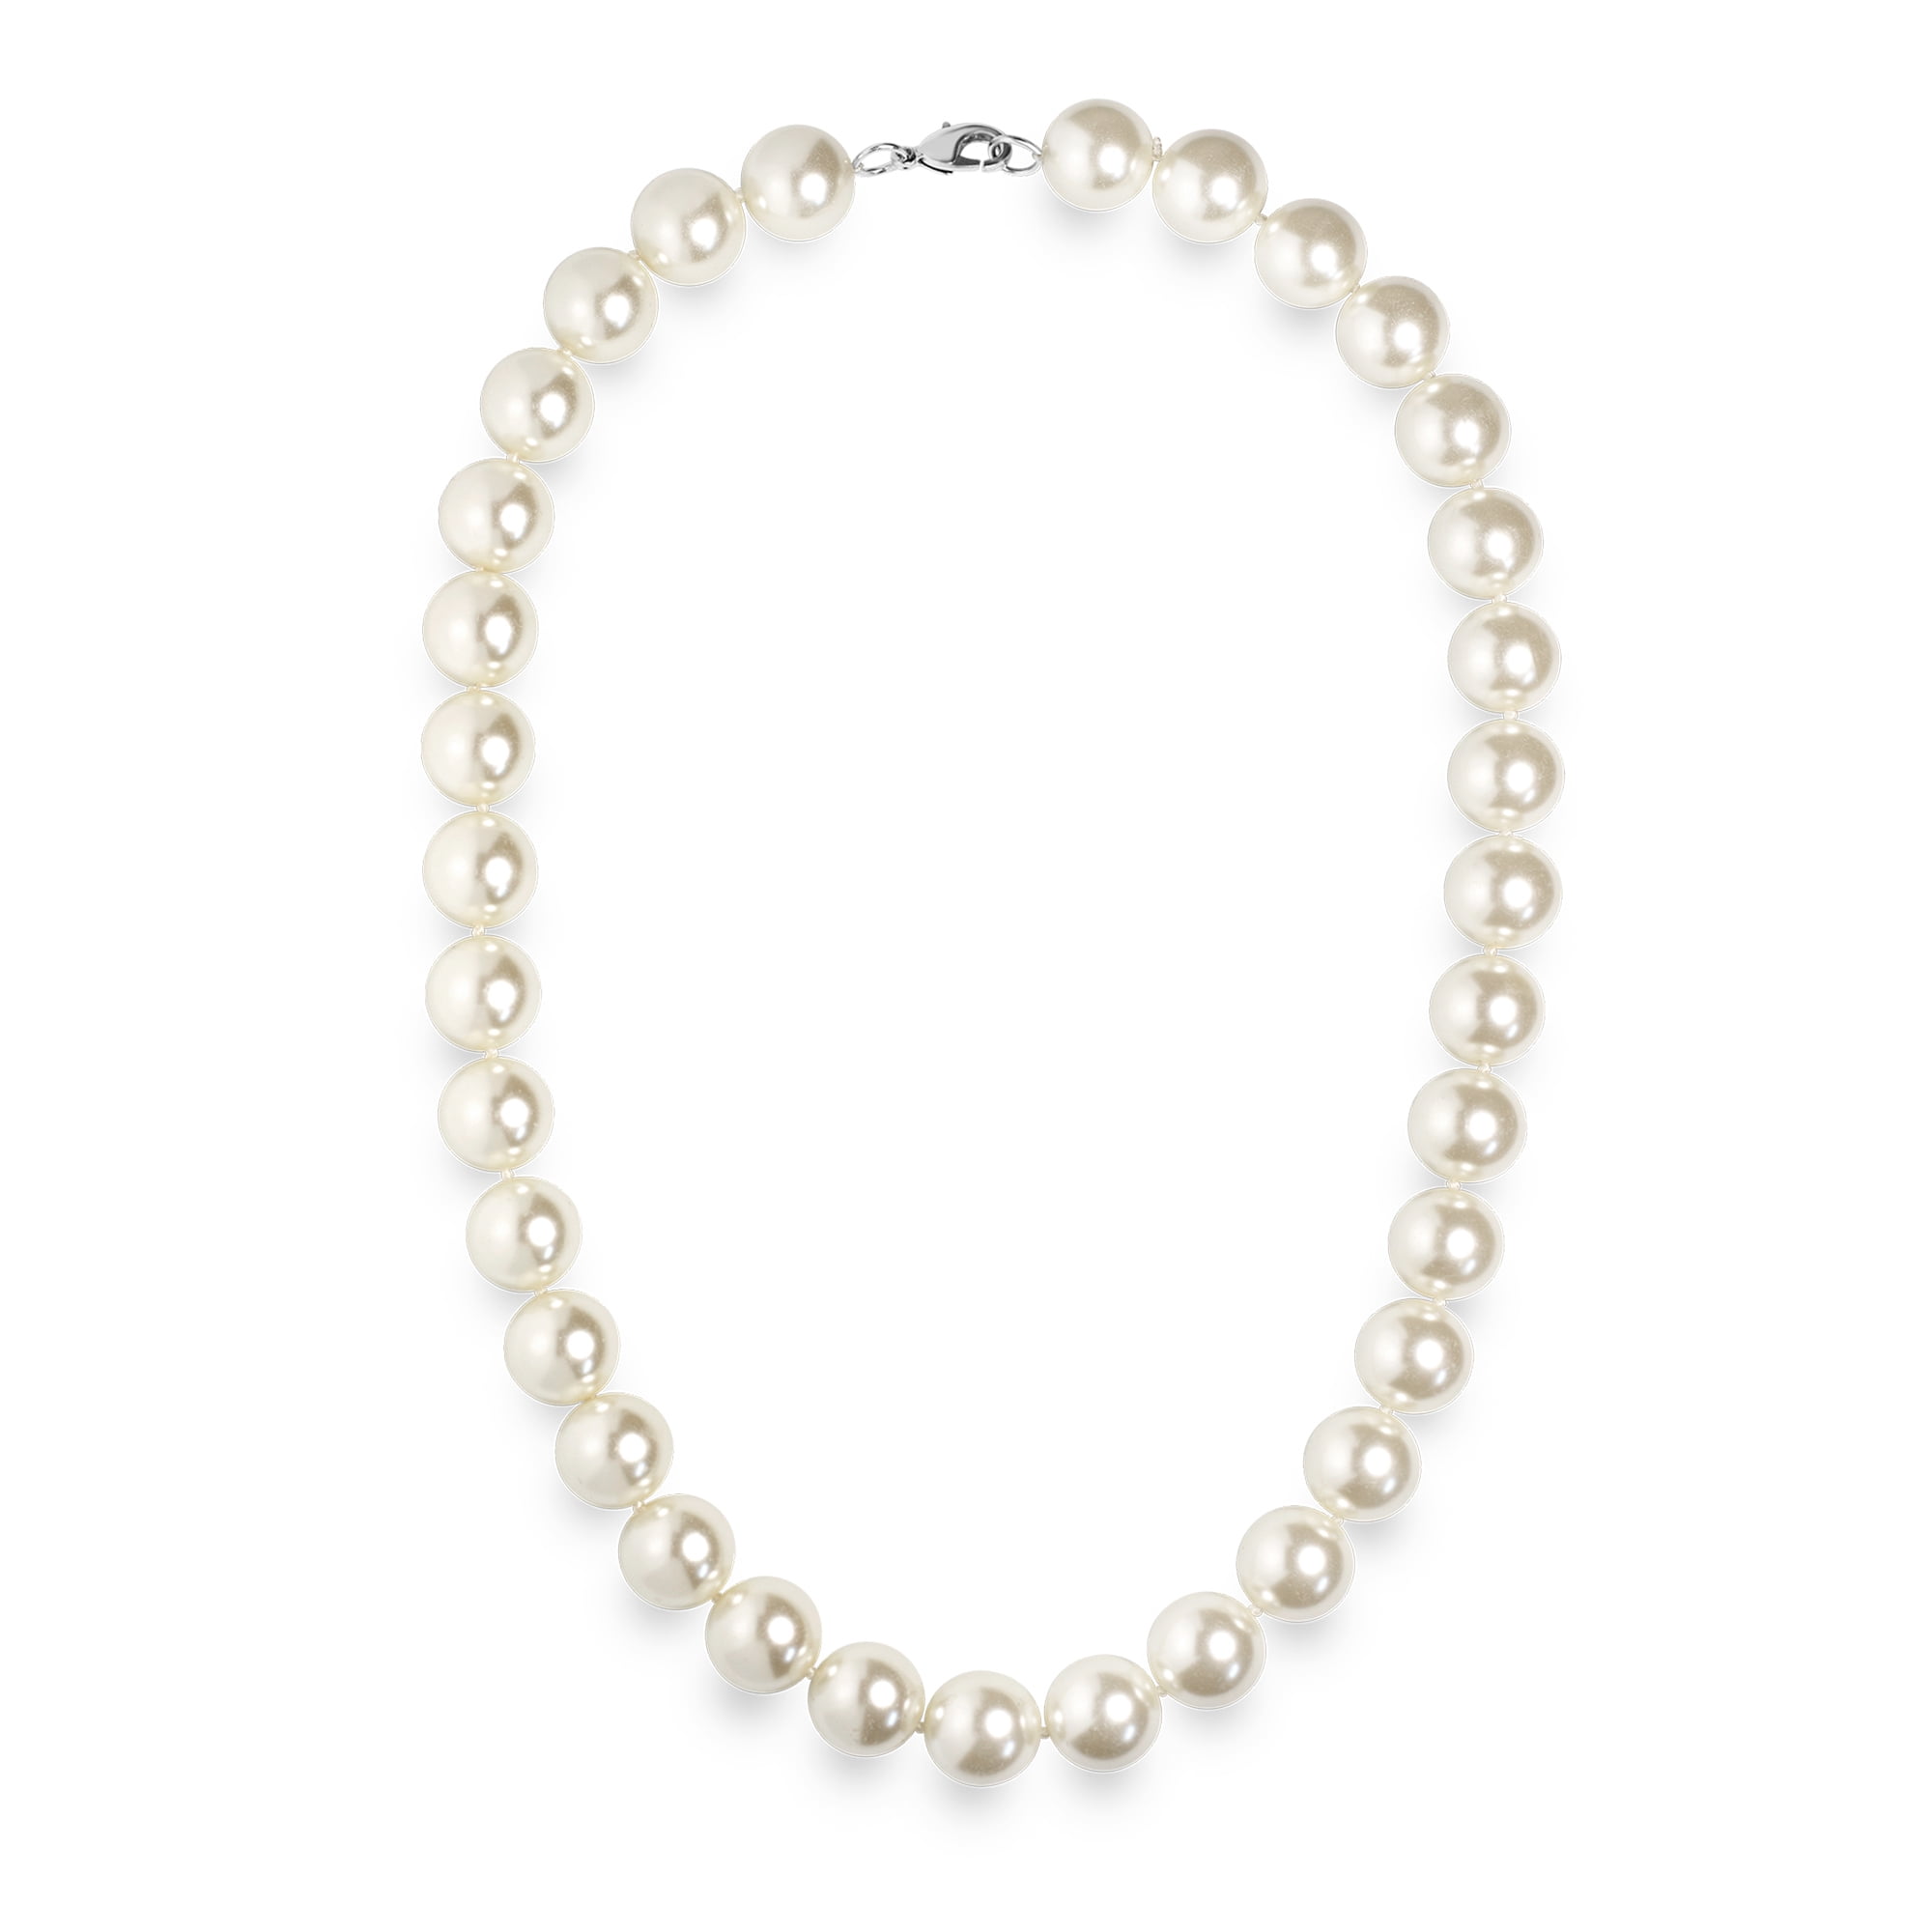 Pearls of mother-of-pearl beige 14mm